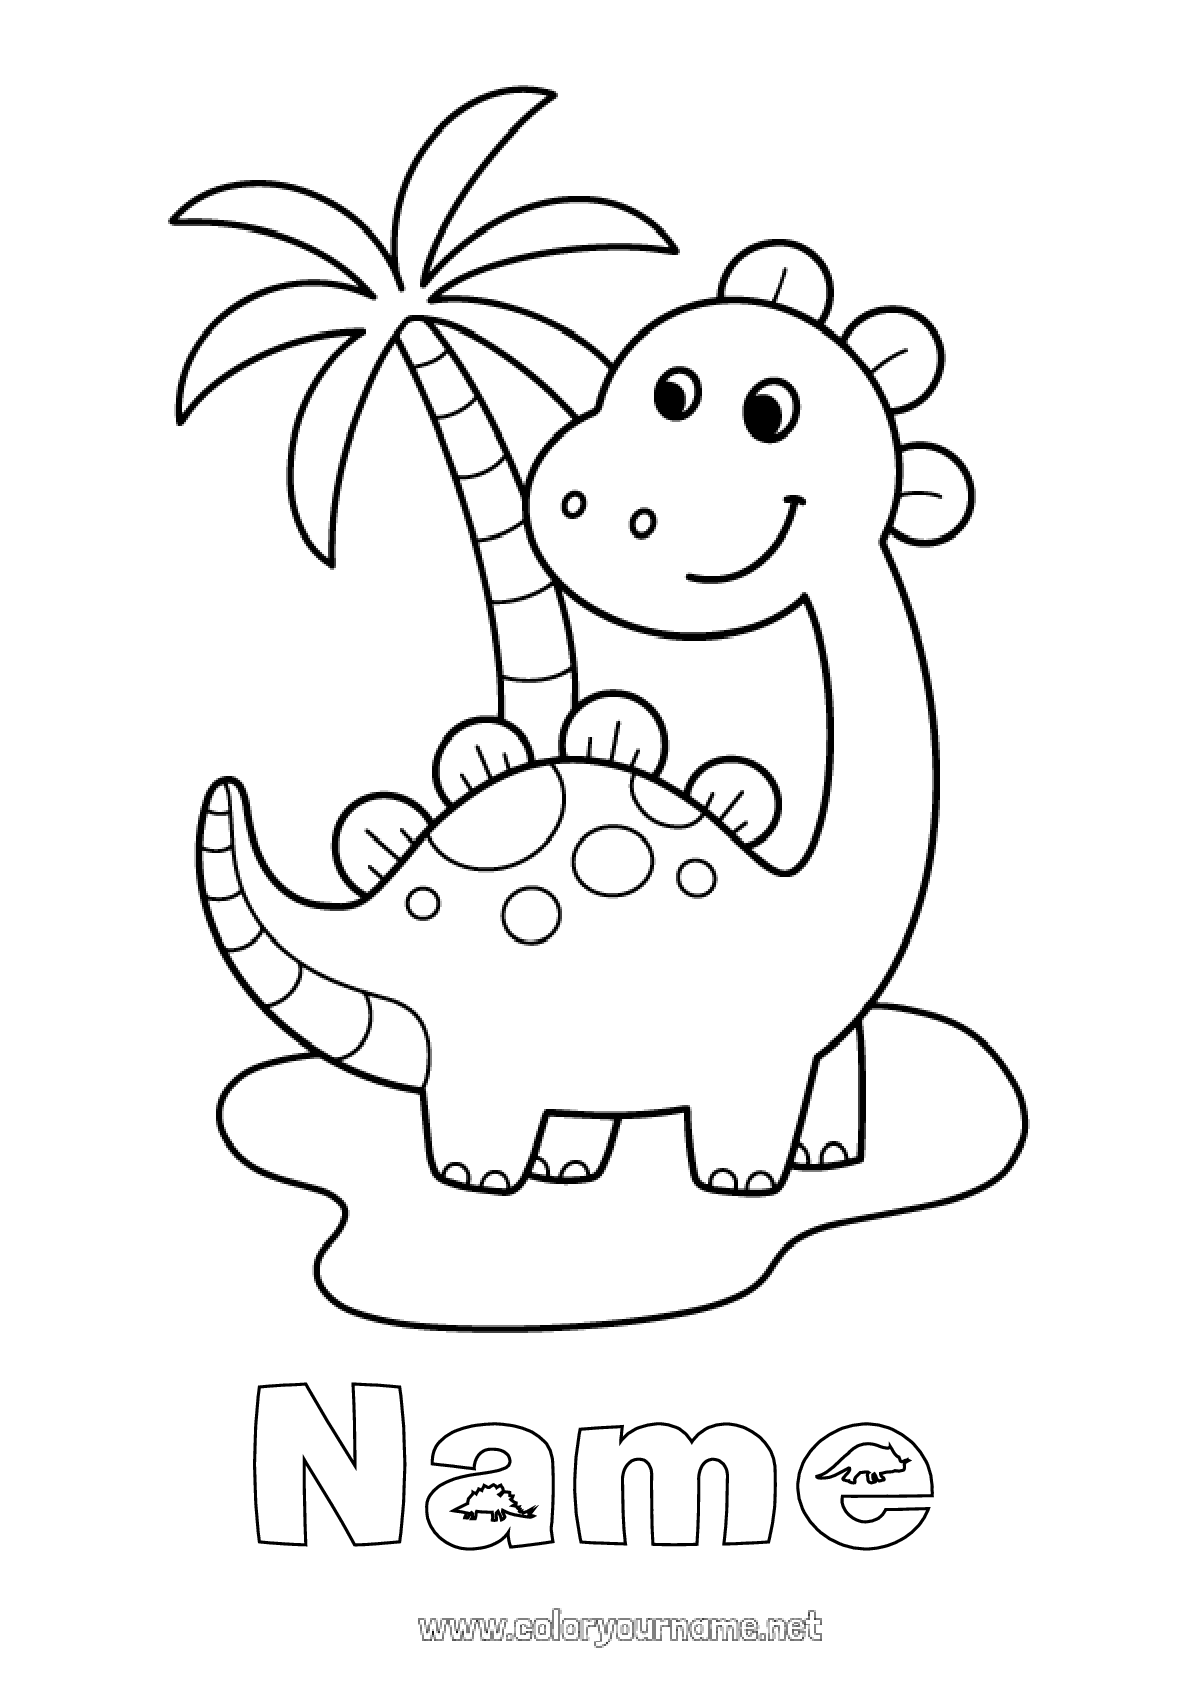 Coloring page No.1376 - Dinosaurs Animal Easy coloring pages